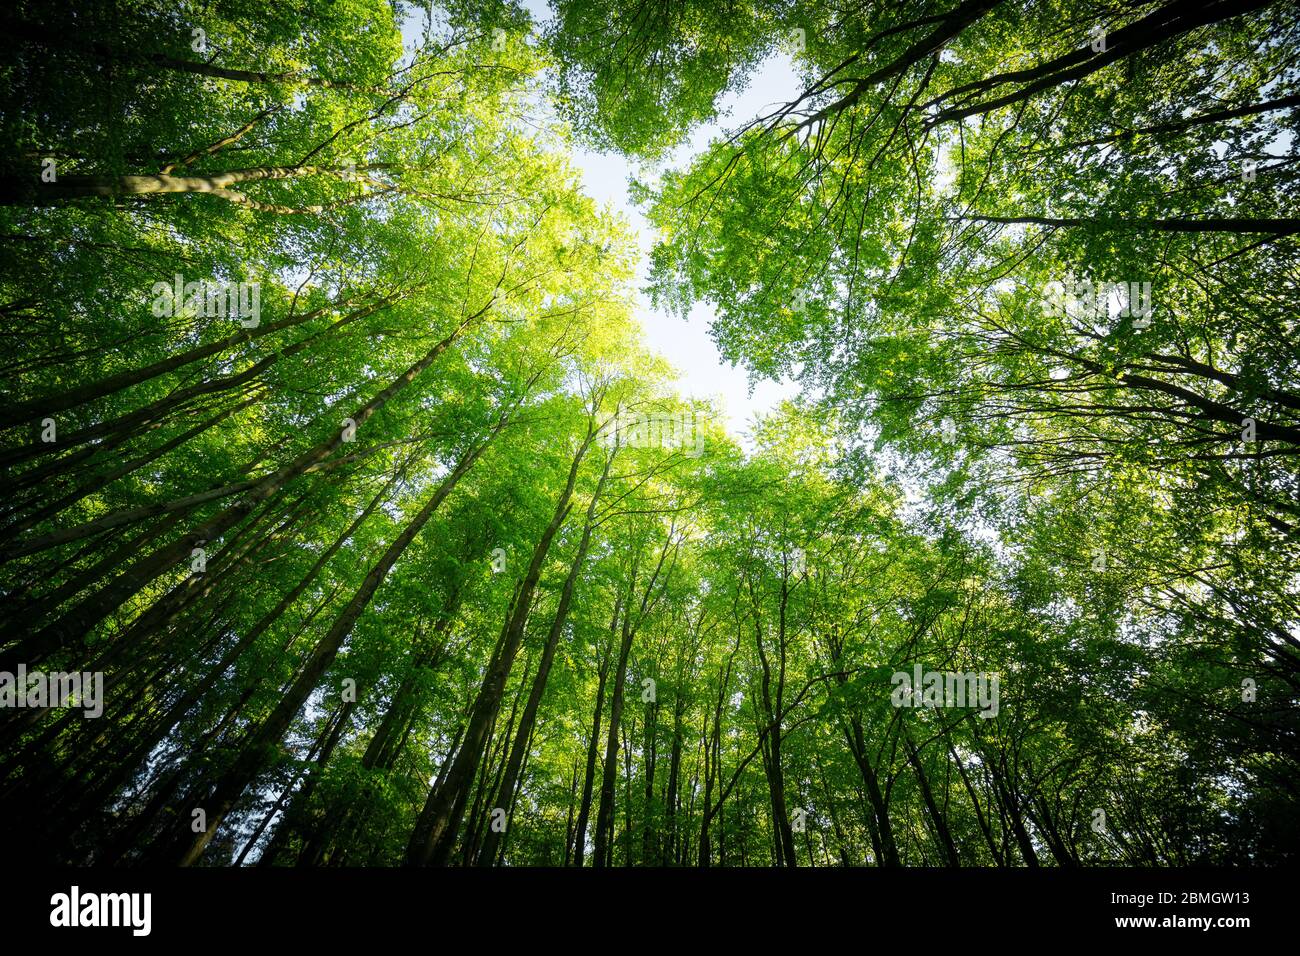 Forest, lush foliage, tall trees at spring or early summer - photographed from below Stock Photo